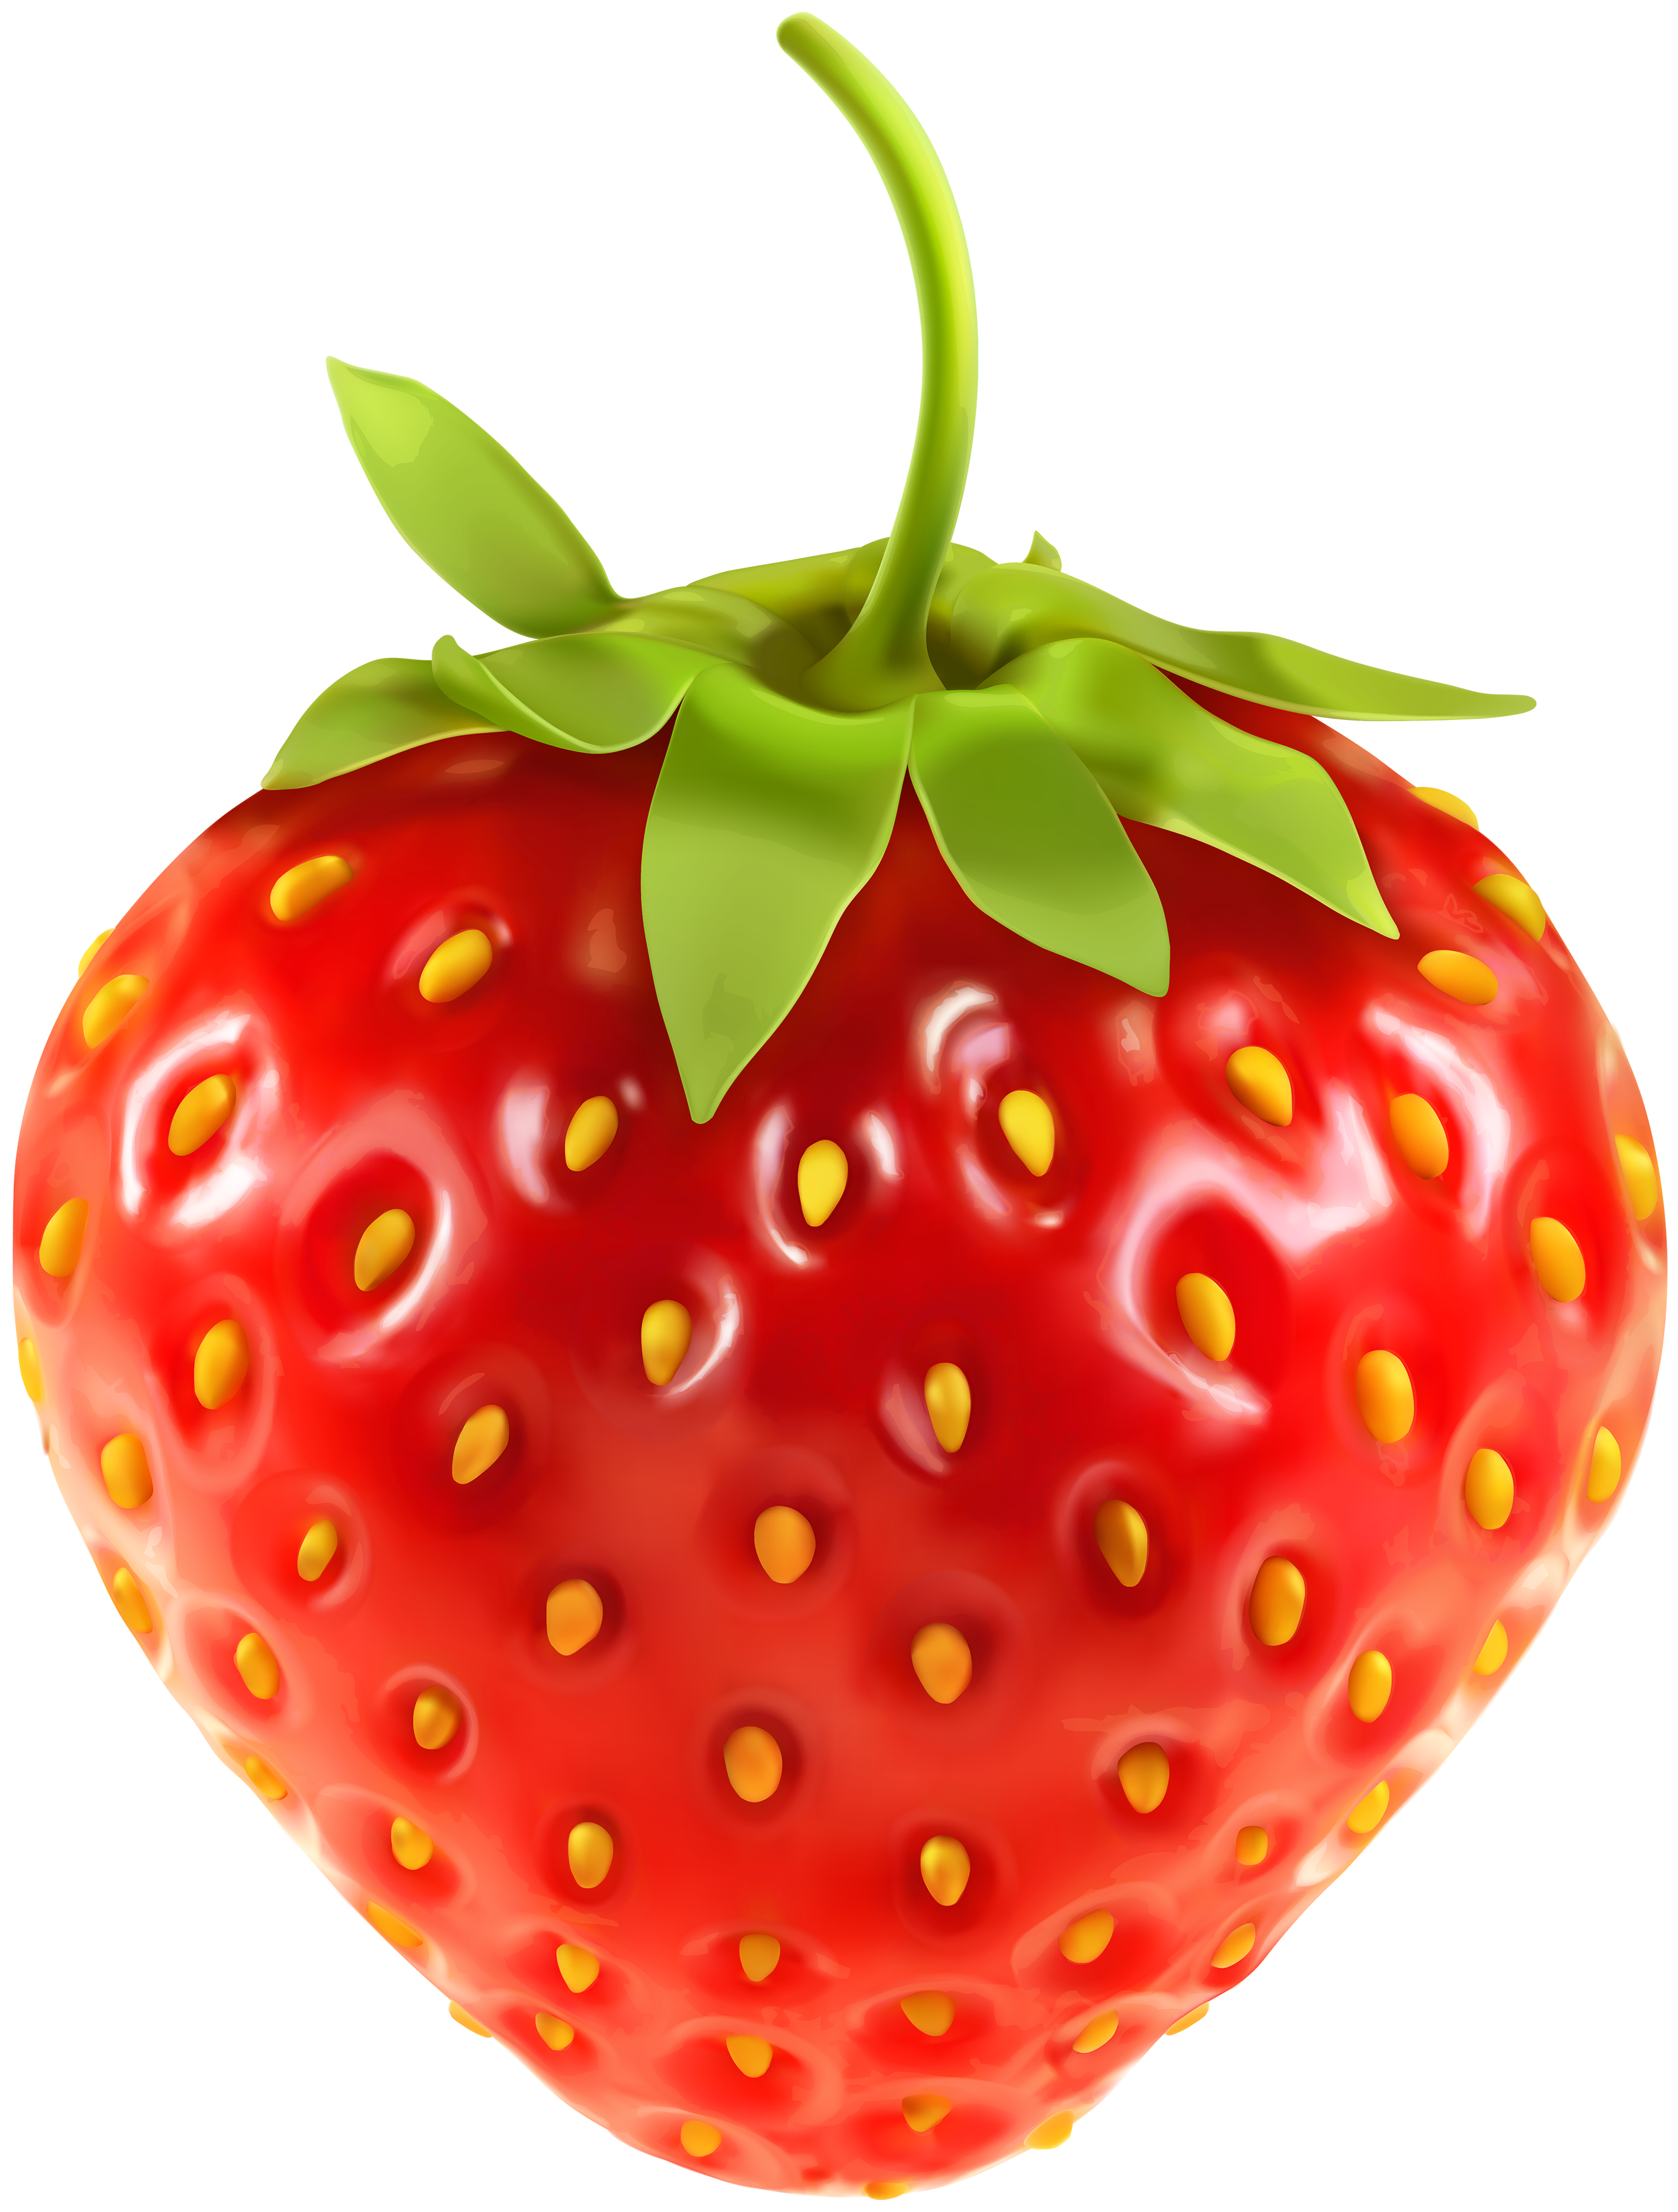 Strawberries clipart strawberry slice. Png image best web